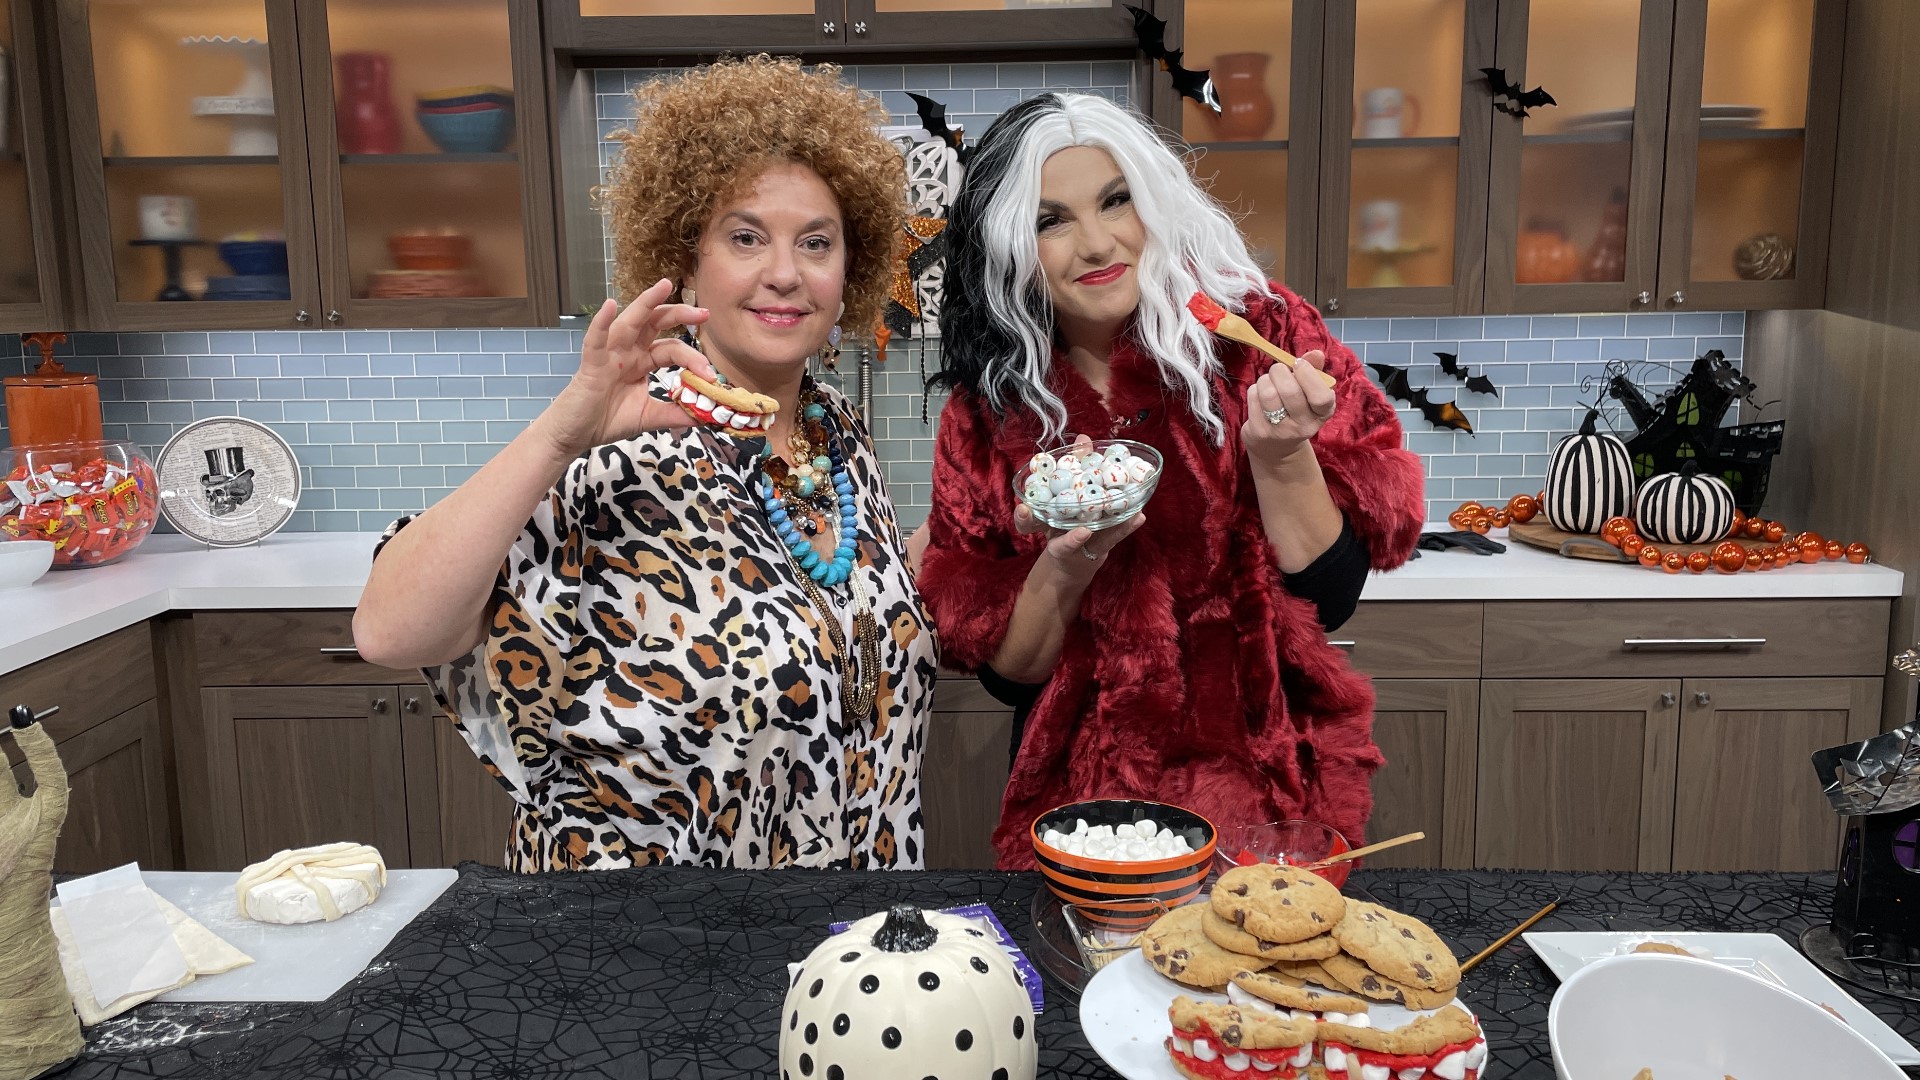 Dracula's dentures, anyone? How about mummy dogs? These recipes are easy and perfect for making with the family! 🧛‍♂️ #newdaynw